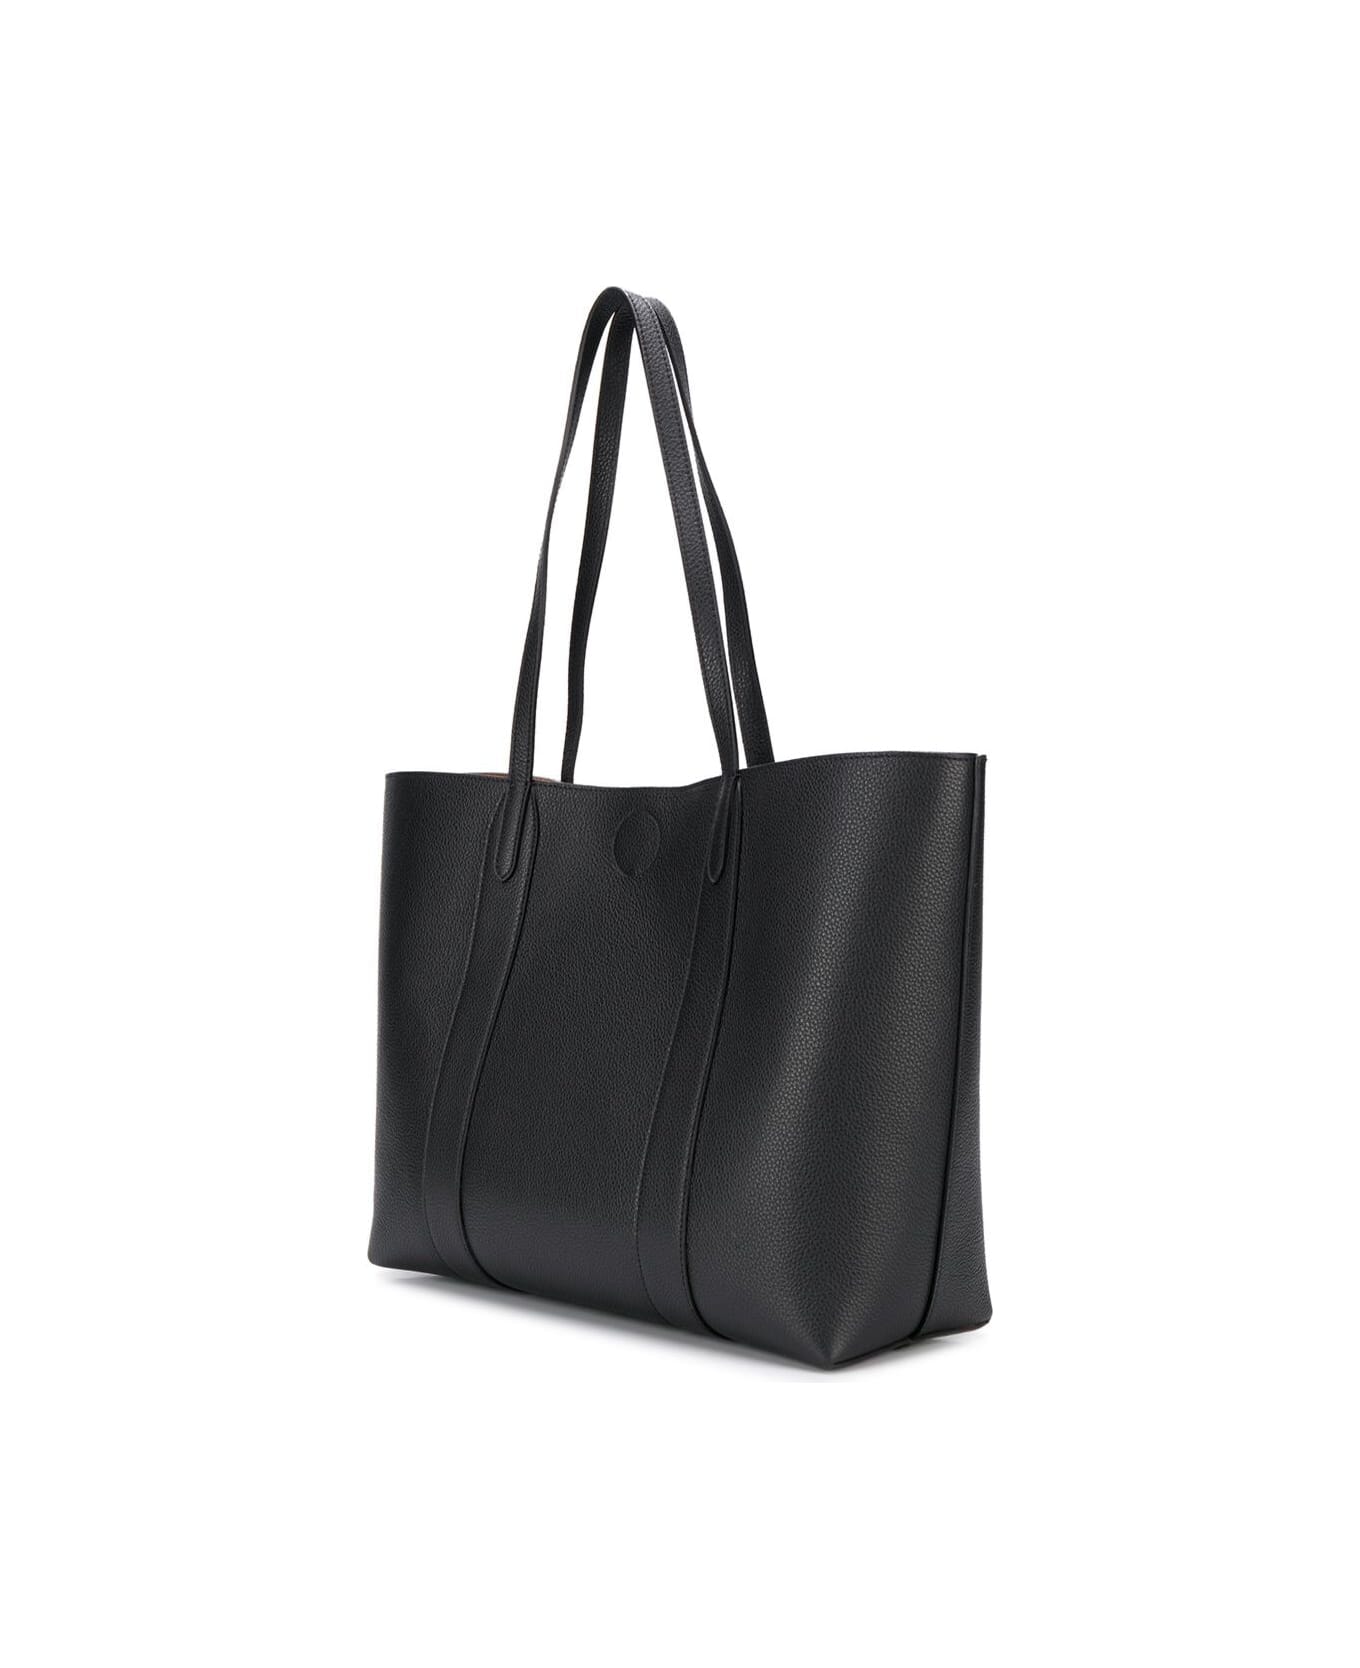 Mulberry Small Tote Black Leather Shopper Bag Mulberry Woman - Black